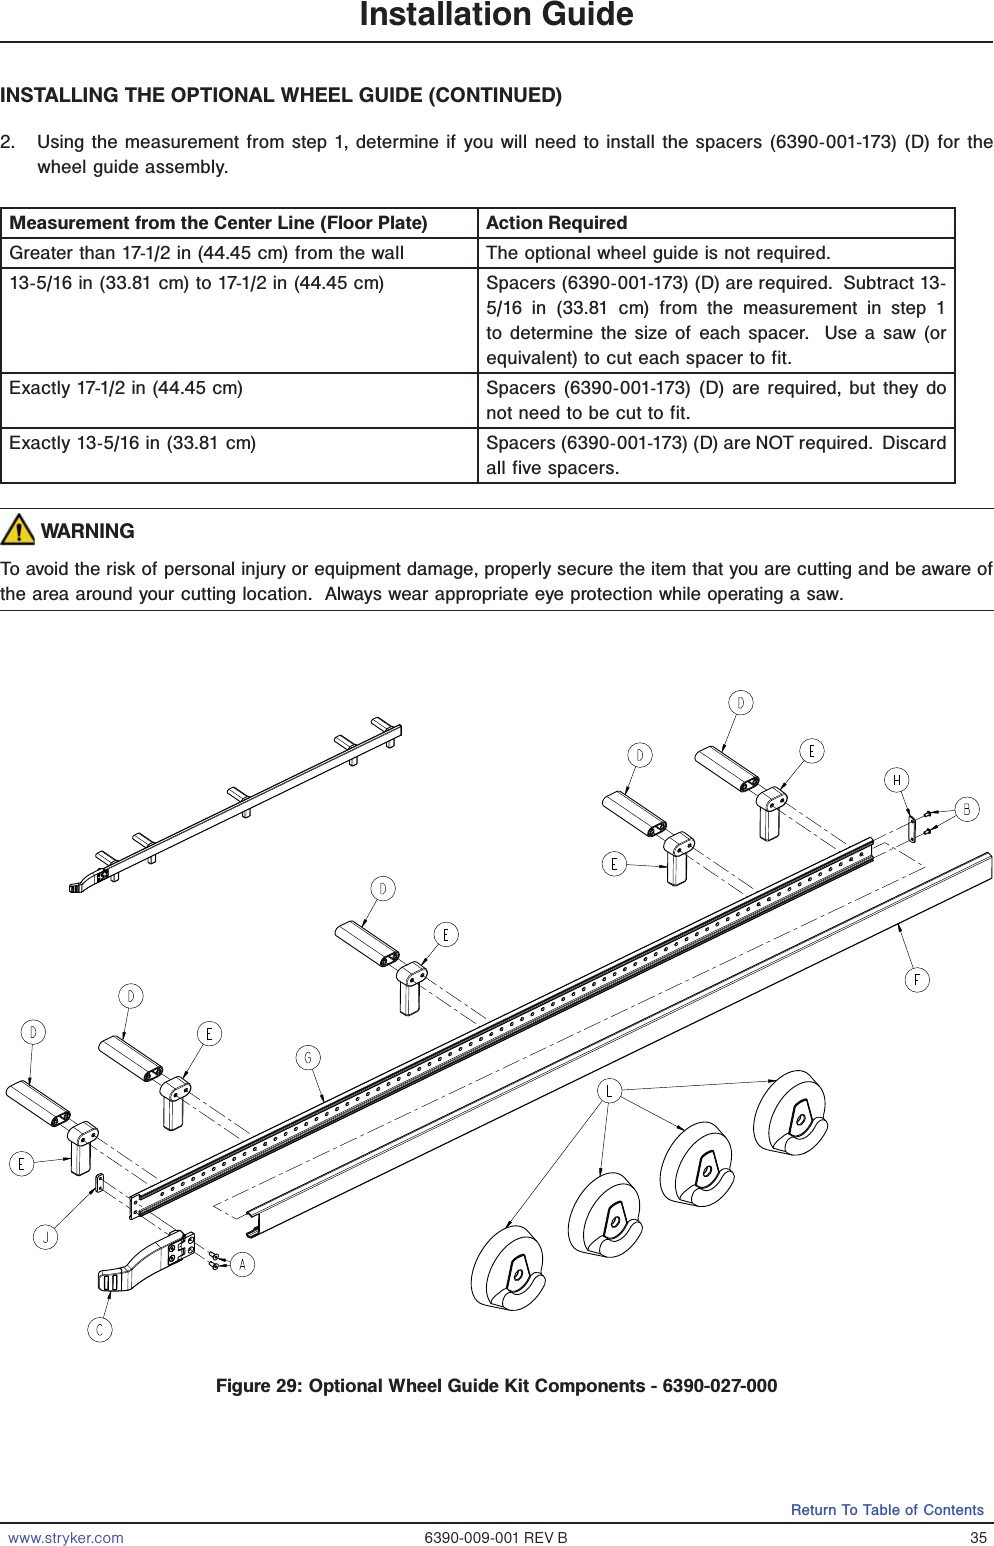 www.stryker.com 6390-009-001 REV B 35Return To Table of ContentsINSTALLING THE OPTIONAL WHEEL GUIDE (CONTINUED)2.  Using the measurement from step 1, determine if you will need to install the spacers (6390-001-173) (D) for the wheel guide assembly.  Measurement from the Center Line (Floor Plate) Action RequiredGreater than 17-1/2 in (44.45 cm) from the wall The optional wheel guide is not required.13-5/16 in (33.81 cm) to 17-1/2 in (44.45 cm) Spacers (6390-001-173) (D) are required.  Subtract 13-5/16 in (33.81 cm) from the measurement in step 1 to determine the size of each spacer.  Use a saw (or equivalent) to cut each spacer to fit.Exactly 17-1/2 in (44.45 cm) Spacers (6390-001-173) (D) are required, but they do not need to be cut to fit.Exactly 13-5/16 in (33.81 cm) Spacers (6390-001-173) (D) are NOT required.  Discard all five spacers. WARNINGTo avoid the risk of personal injury or equipment damage, properly secure the item that you are cutting and be aware of the area around your cutting location.  Always wear appropriate eye protection while operating a saw.   Installation GuideFigure 29: Optional Wheel Guide Kit Components - 6390-027-000